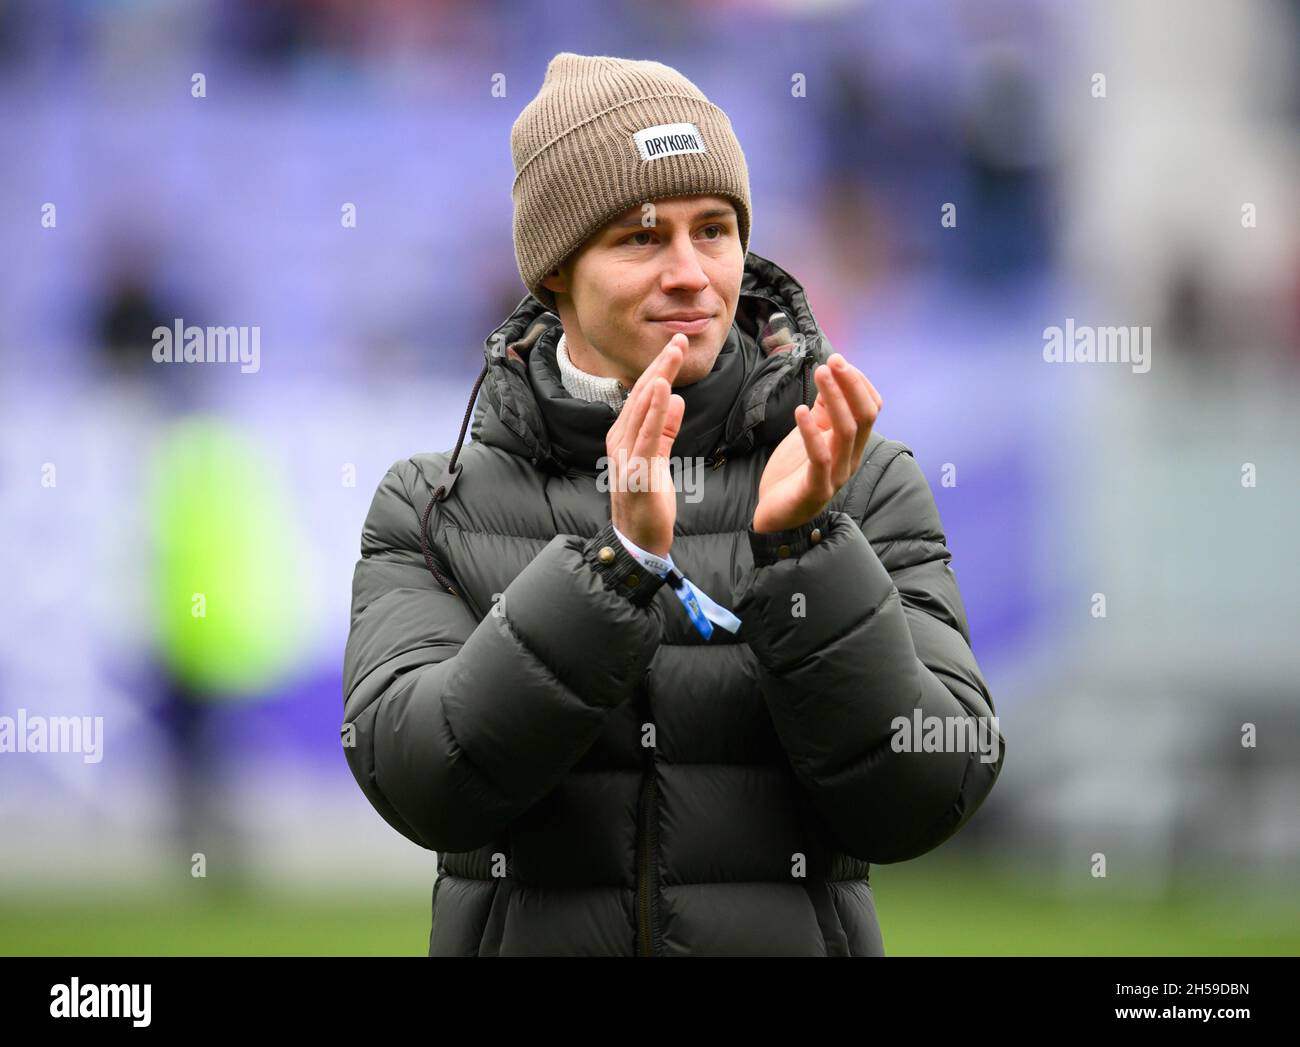 Aue, Germany. 07th Nov, 2021. Football: 2. Bundesliga, Erzgebirge Aue - 1. FC Heidenheim, Matchday 13, Erzgebirgsstadion. Aue player Clemens Fandrich, who was banned for 7 months, is on the field after the win. Credit: Robert Michael/dpa-Zentralbild/dpa - IMPORTANT NOTE: In accordance with the regulations of the DFL Deutsche Fußball Liga and/or the DFB Deutscher Fußball-Bund, it is prohibited to use or have used photographs taken in the stadium and/or of the match in the form of sequence pictures and/or video-like photo series./dpa/Alamy Live News Stock Photo